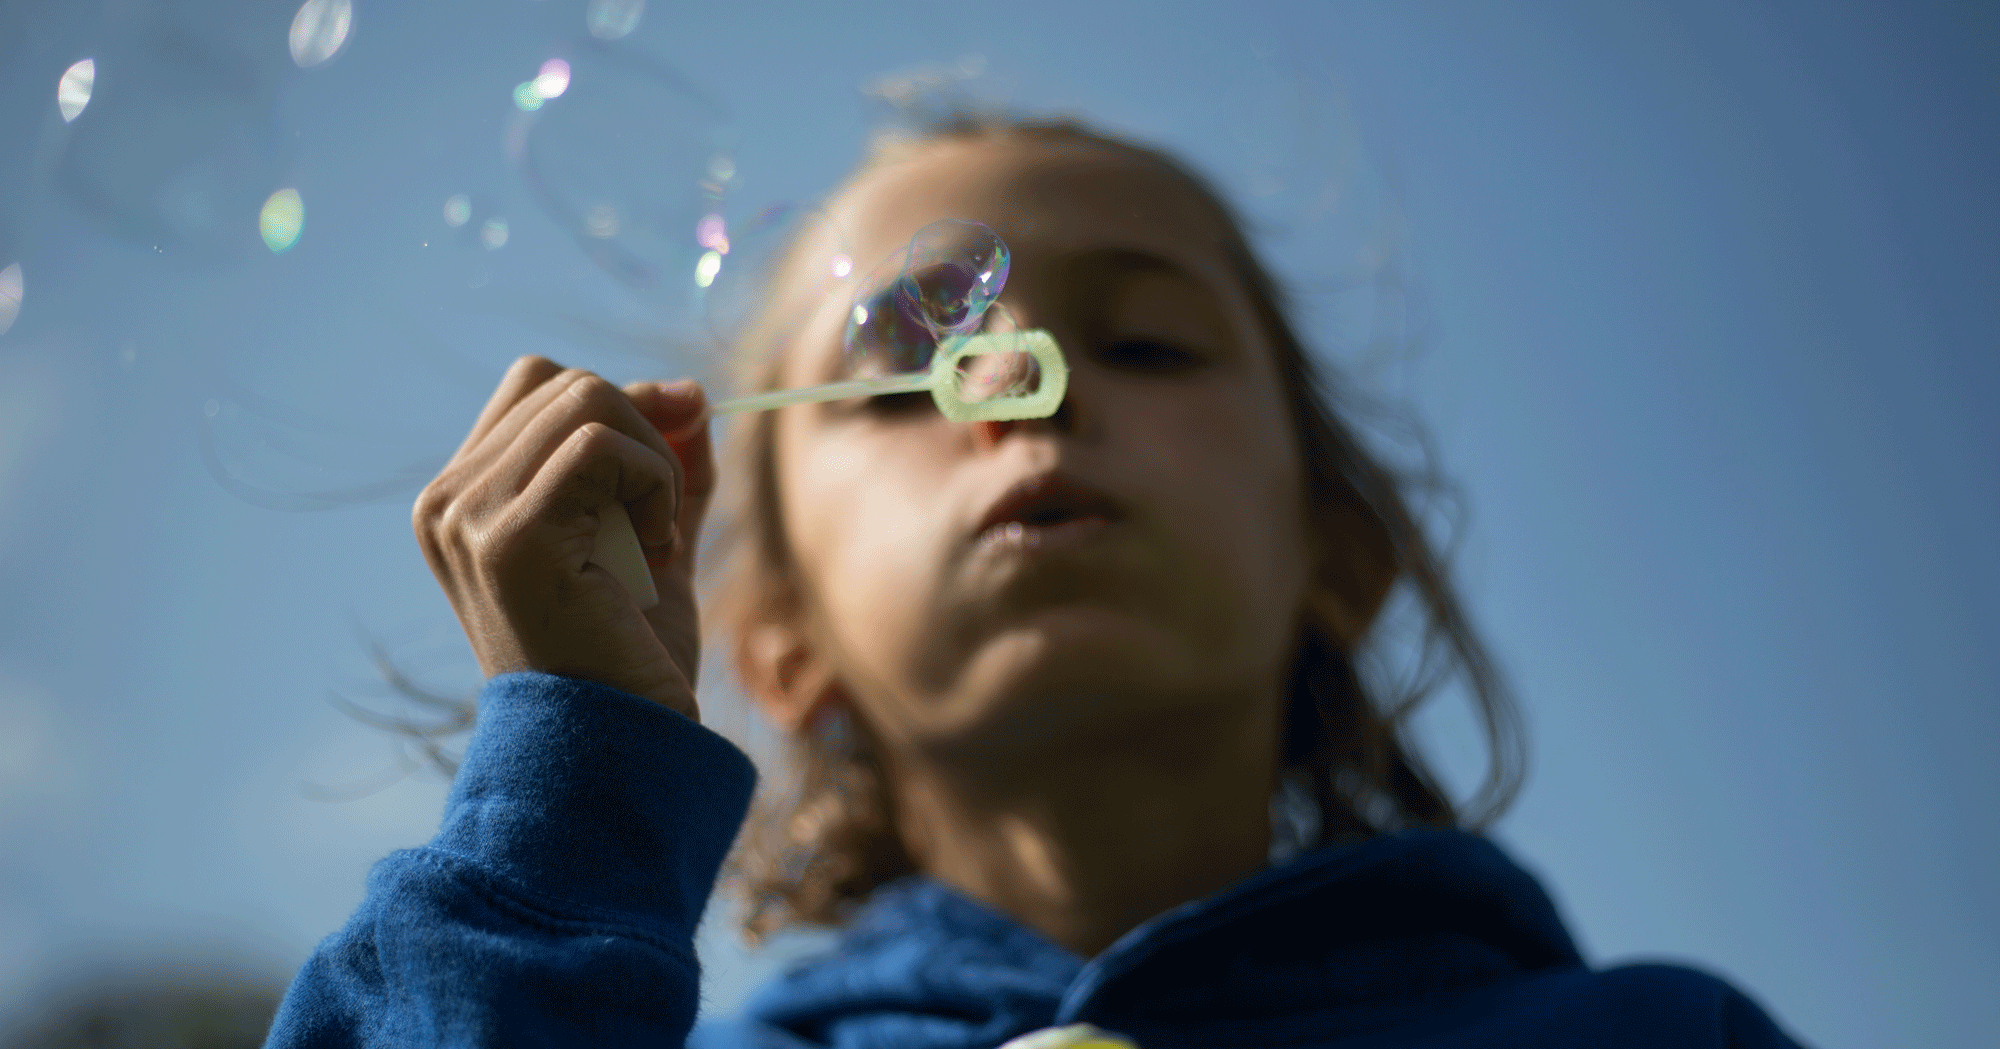 Natalia takes a deep breath and blows bubbles. Join our campaign to keep children like Natalia safe from the dangers of toxic air. Photo: Unicef/2018/Sutton-Hibbert